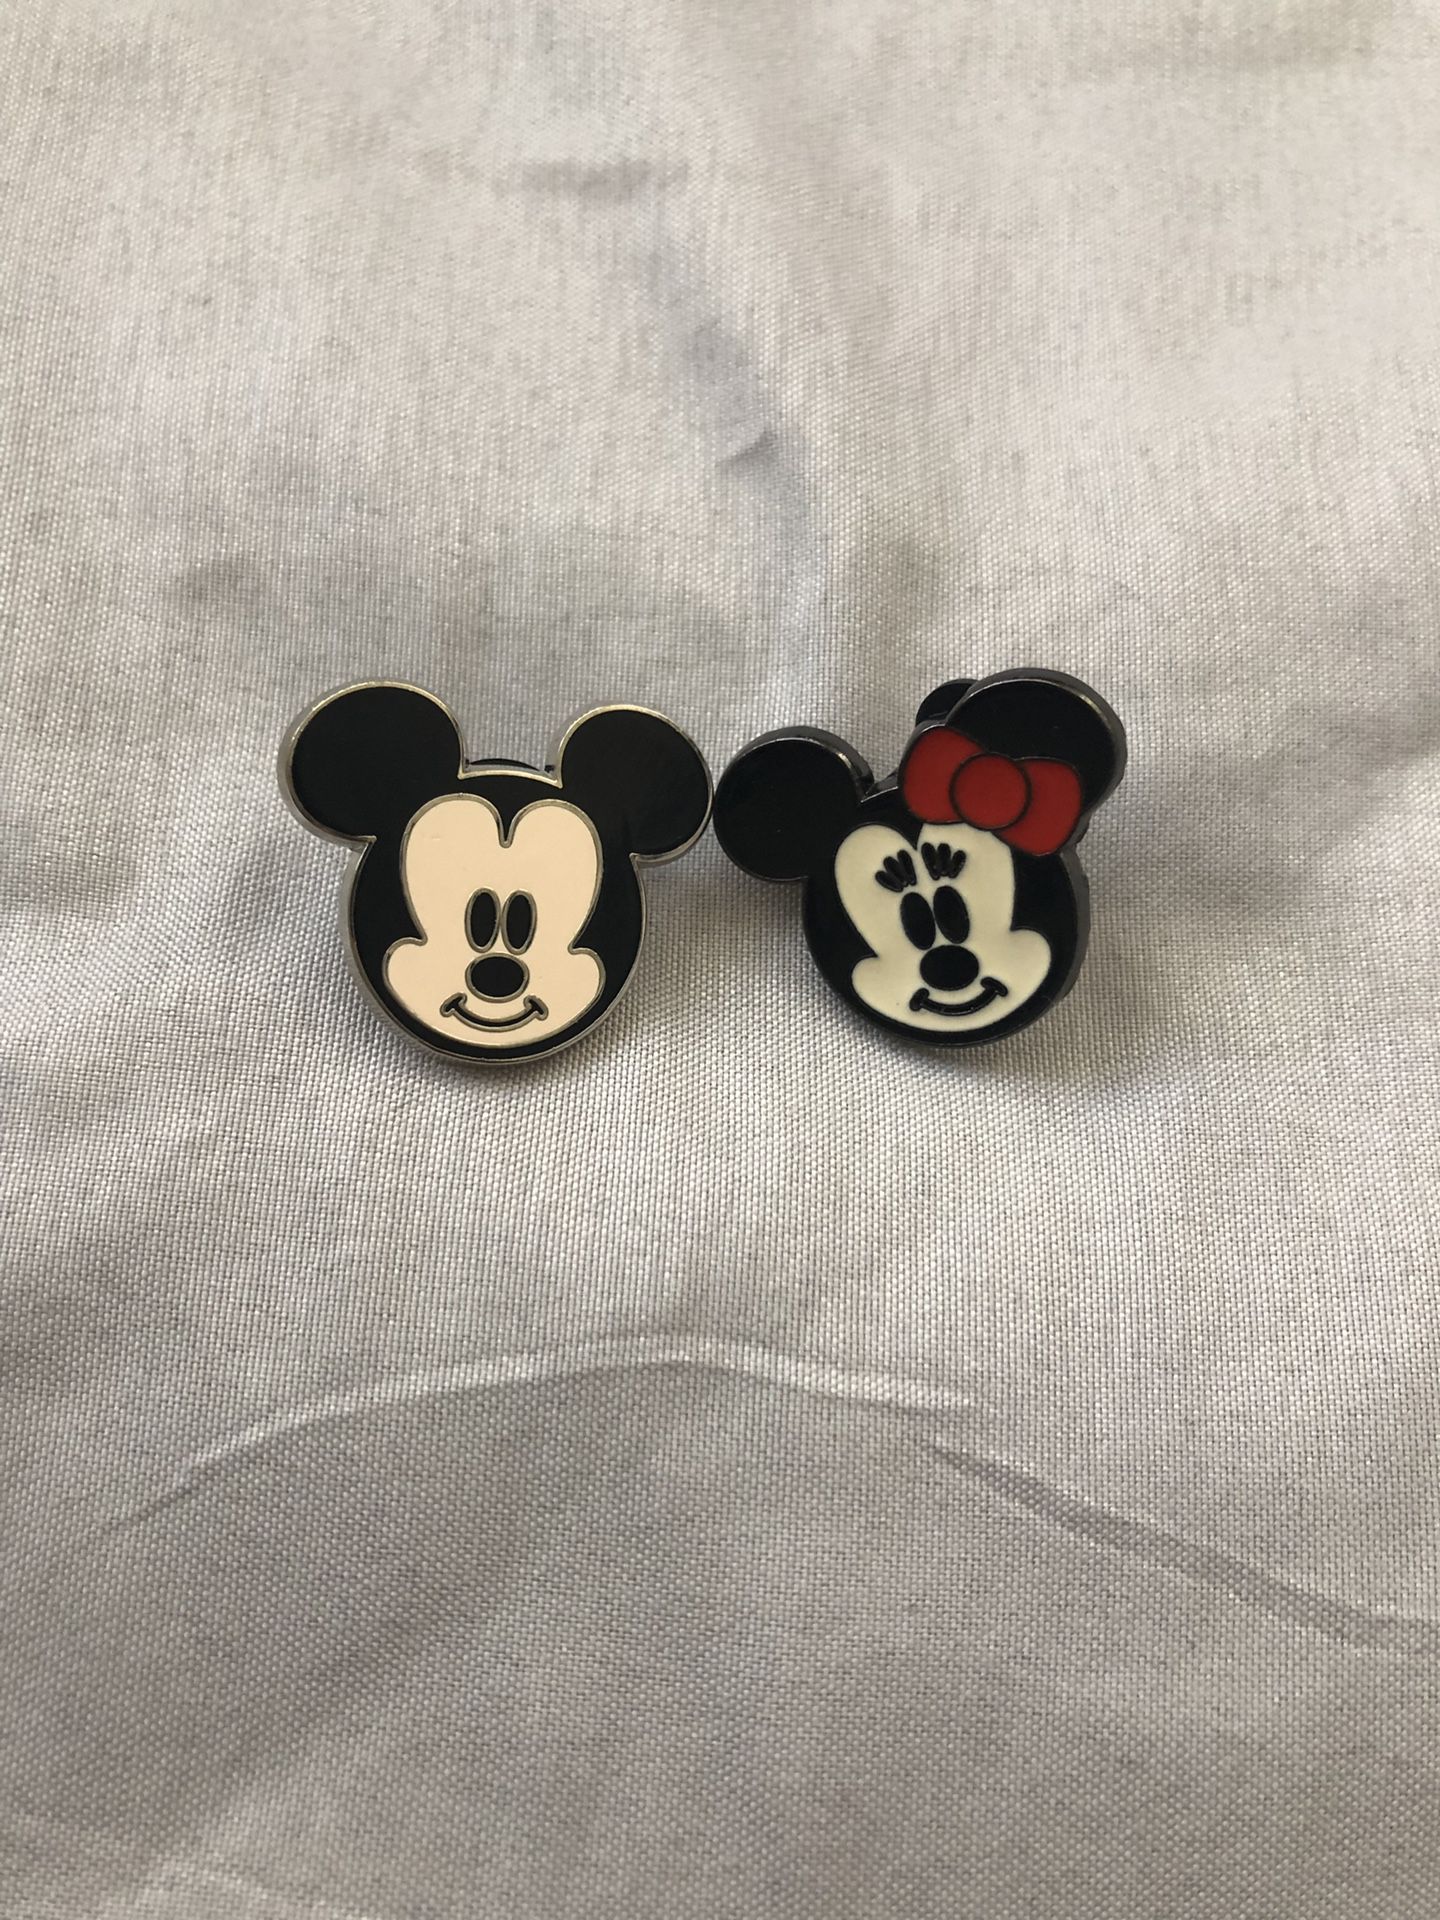 Mickey and Minnie Mouse Disney pins